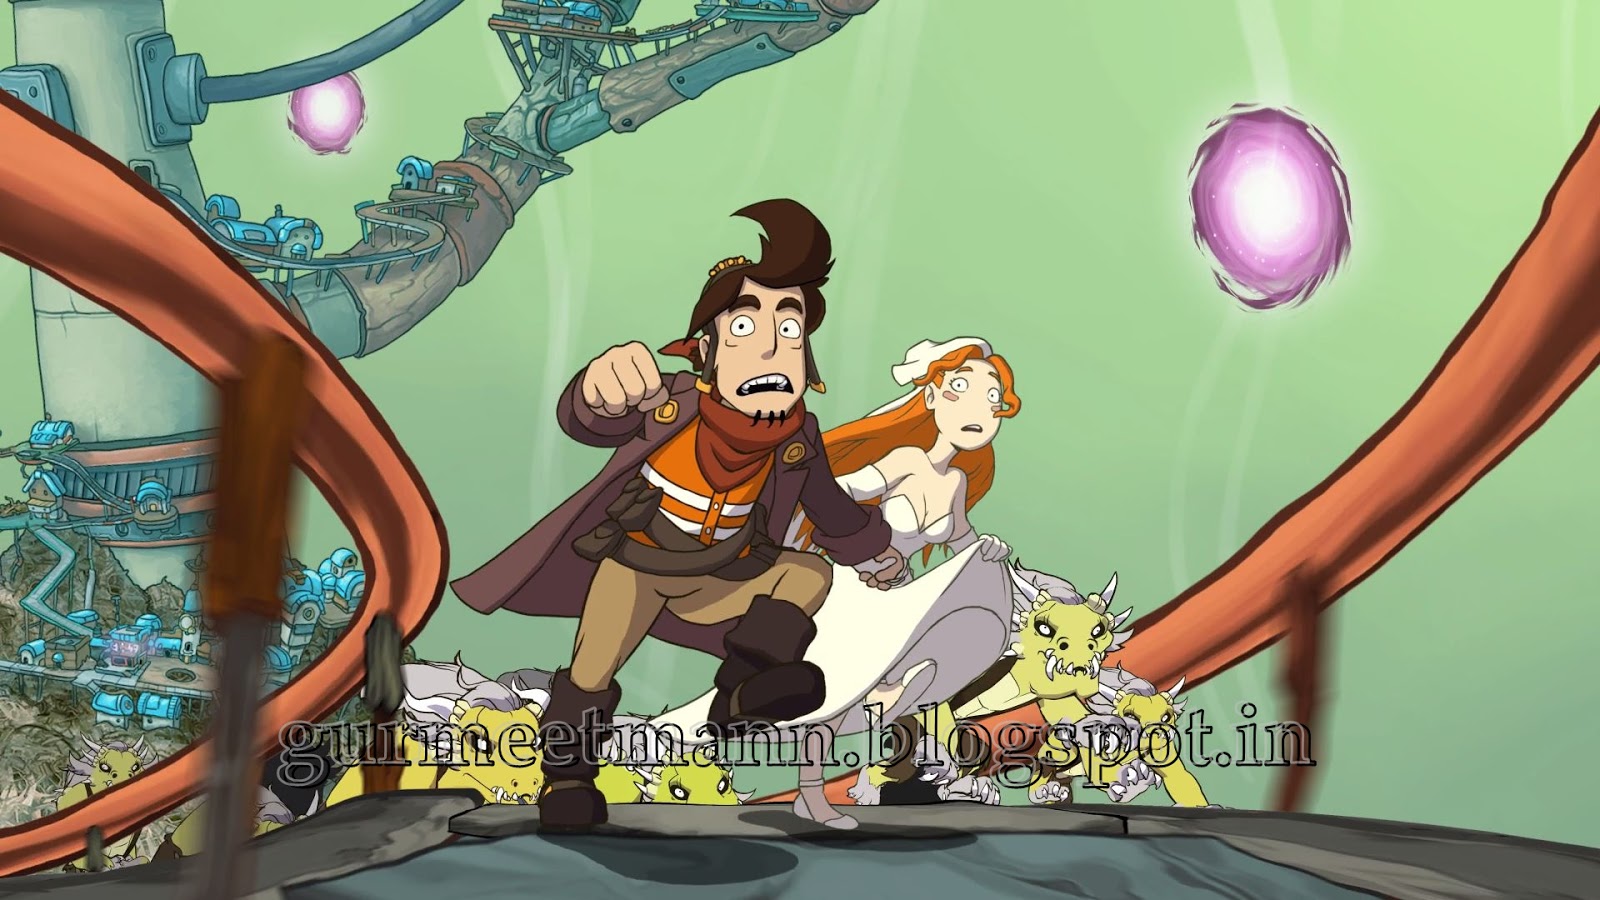 Deponia Tipps